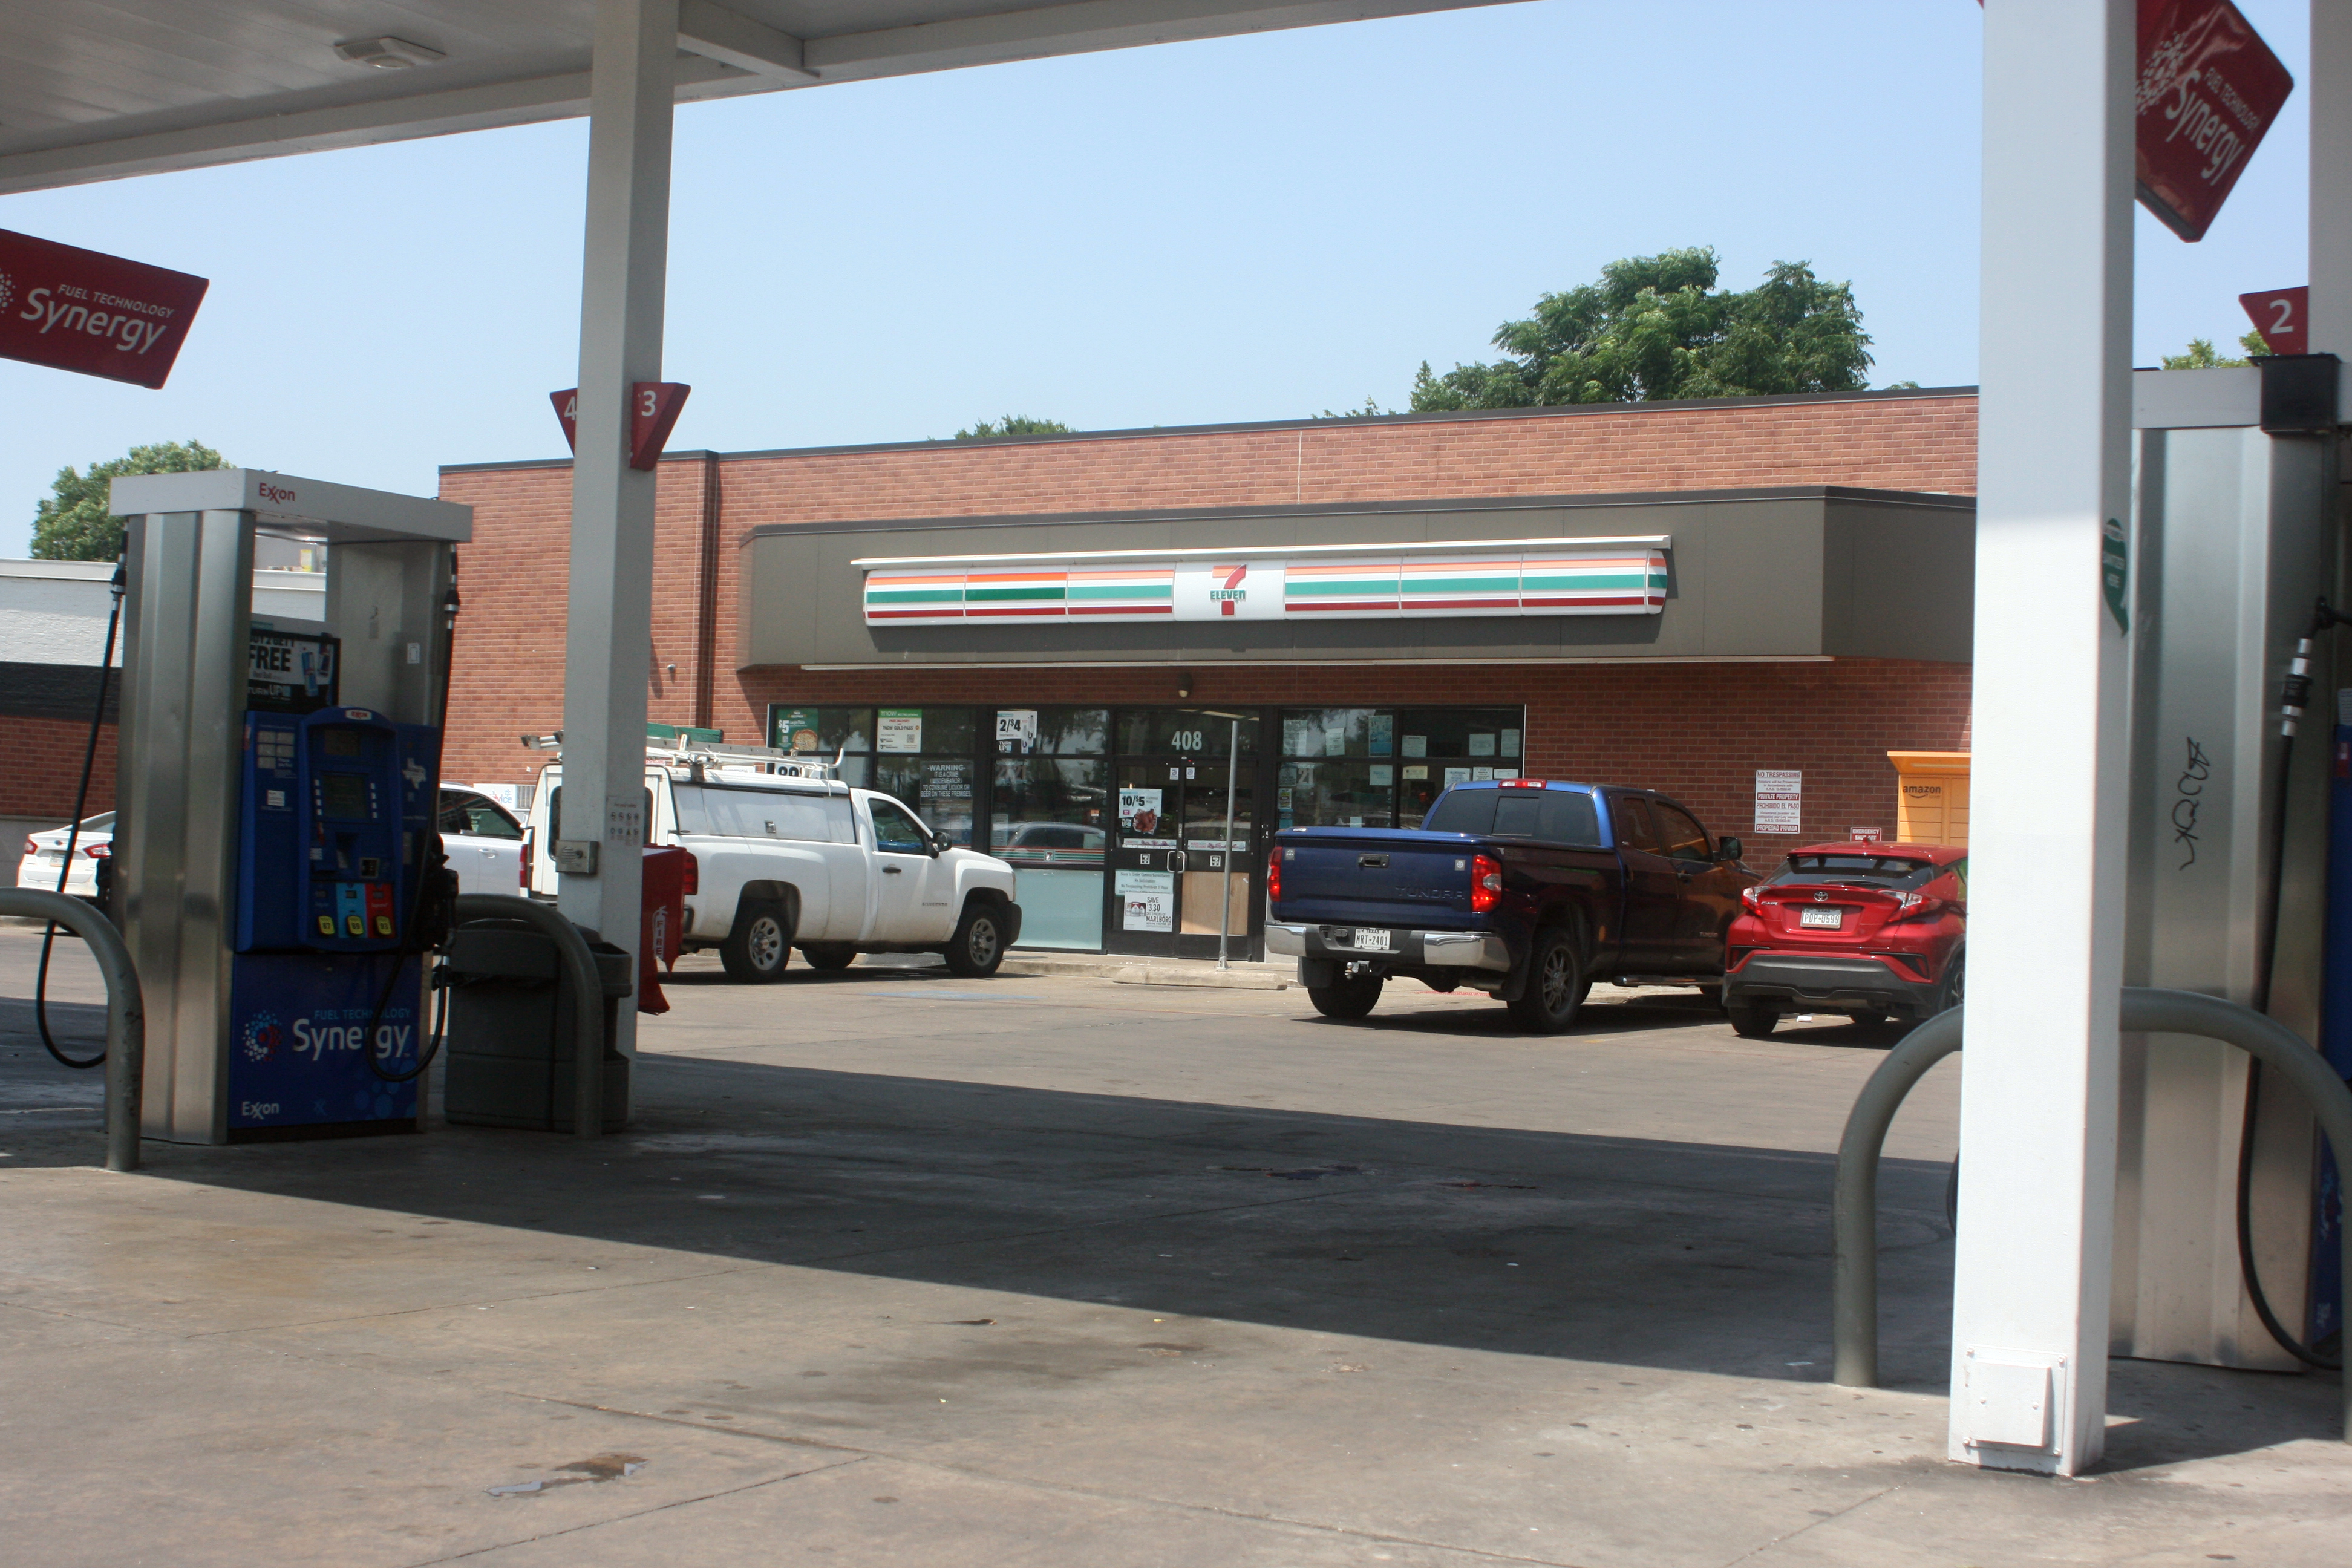 Suspect at large after deadly shooting at 7-Eleven in Oak Cliff